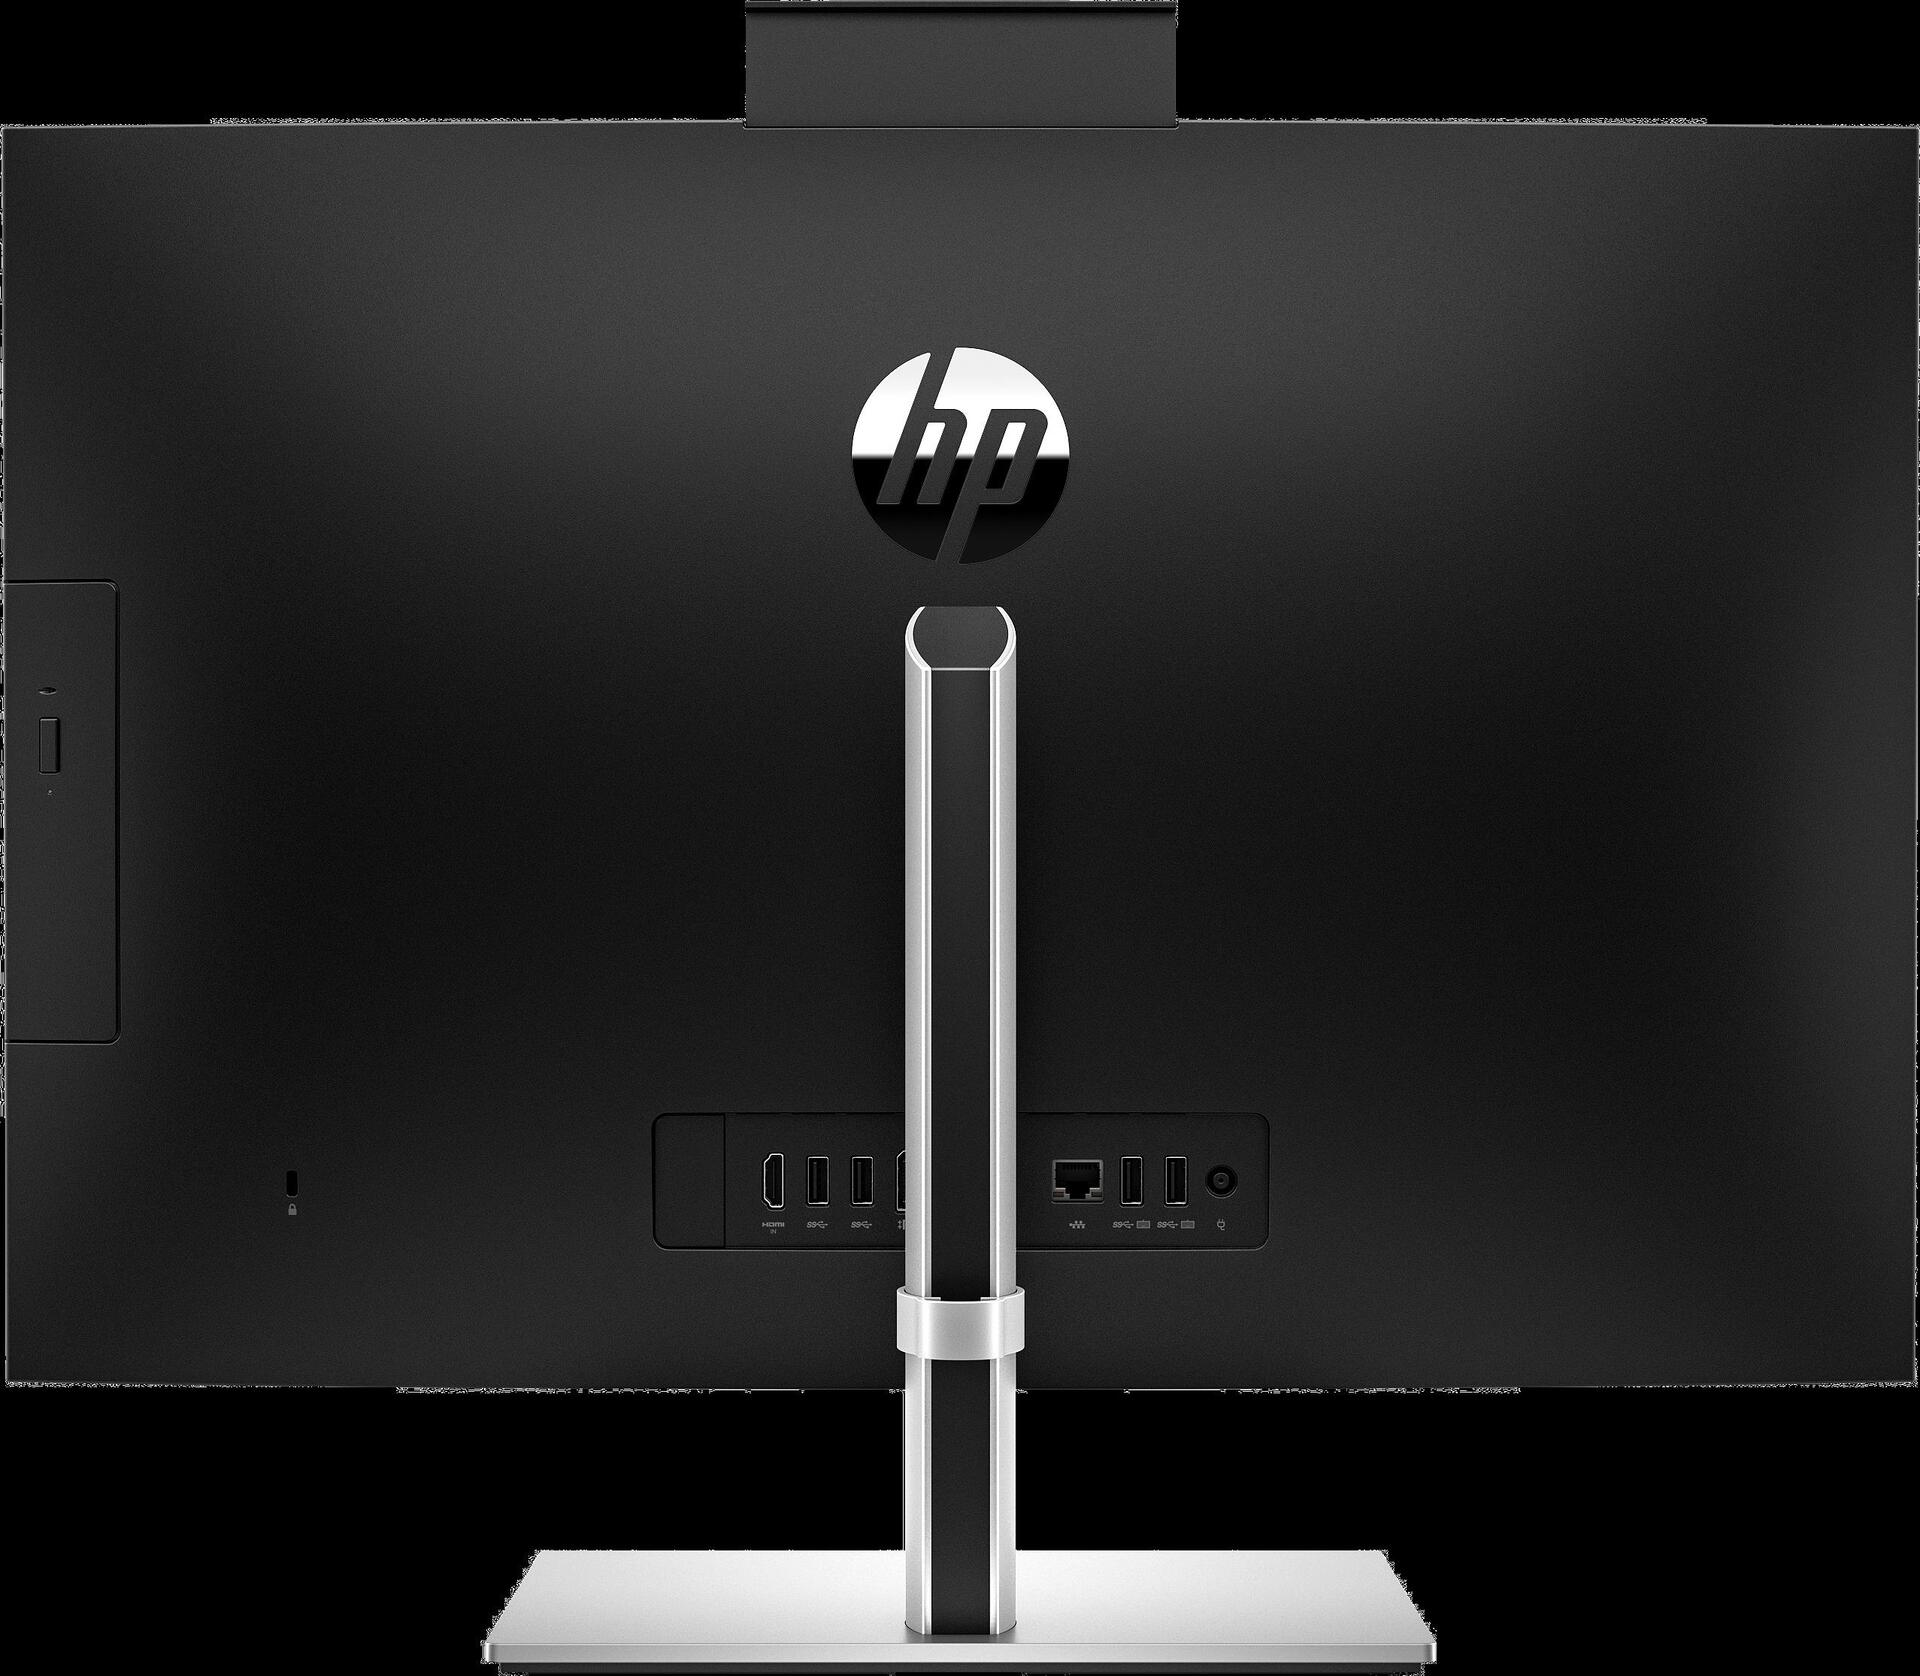 HP ProOne 440 G9 - All-in-One (Komplettlösung) - Core i5 12400T / 1.8 GHz - RAM 8 GB - SSD 256 GB - NVMe - UHD Graphics 730 - GigE, Bluetooth 5.2, 802.11ax (Wi-Fi 6E) - WLAN: Bluetooth 5.2, 802.11a/b/g/n/ac/ax (Wi-Fi 6E) - Win 11 Pro - Monitor: LED 60.5 cm (23.8") 1920 x 1080 (Full HD) @ 60 Hz - Tastatur: Deutsch - mit HP 2 years Next Business Day Onsite Hardware Support for Desktops